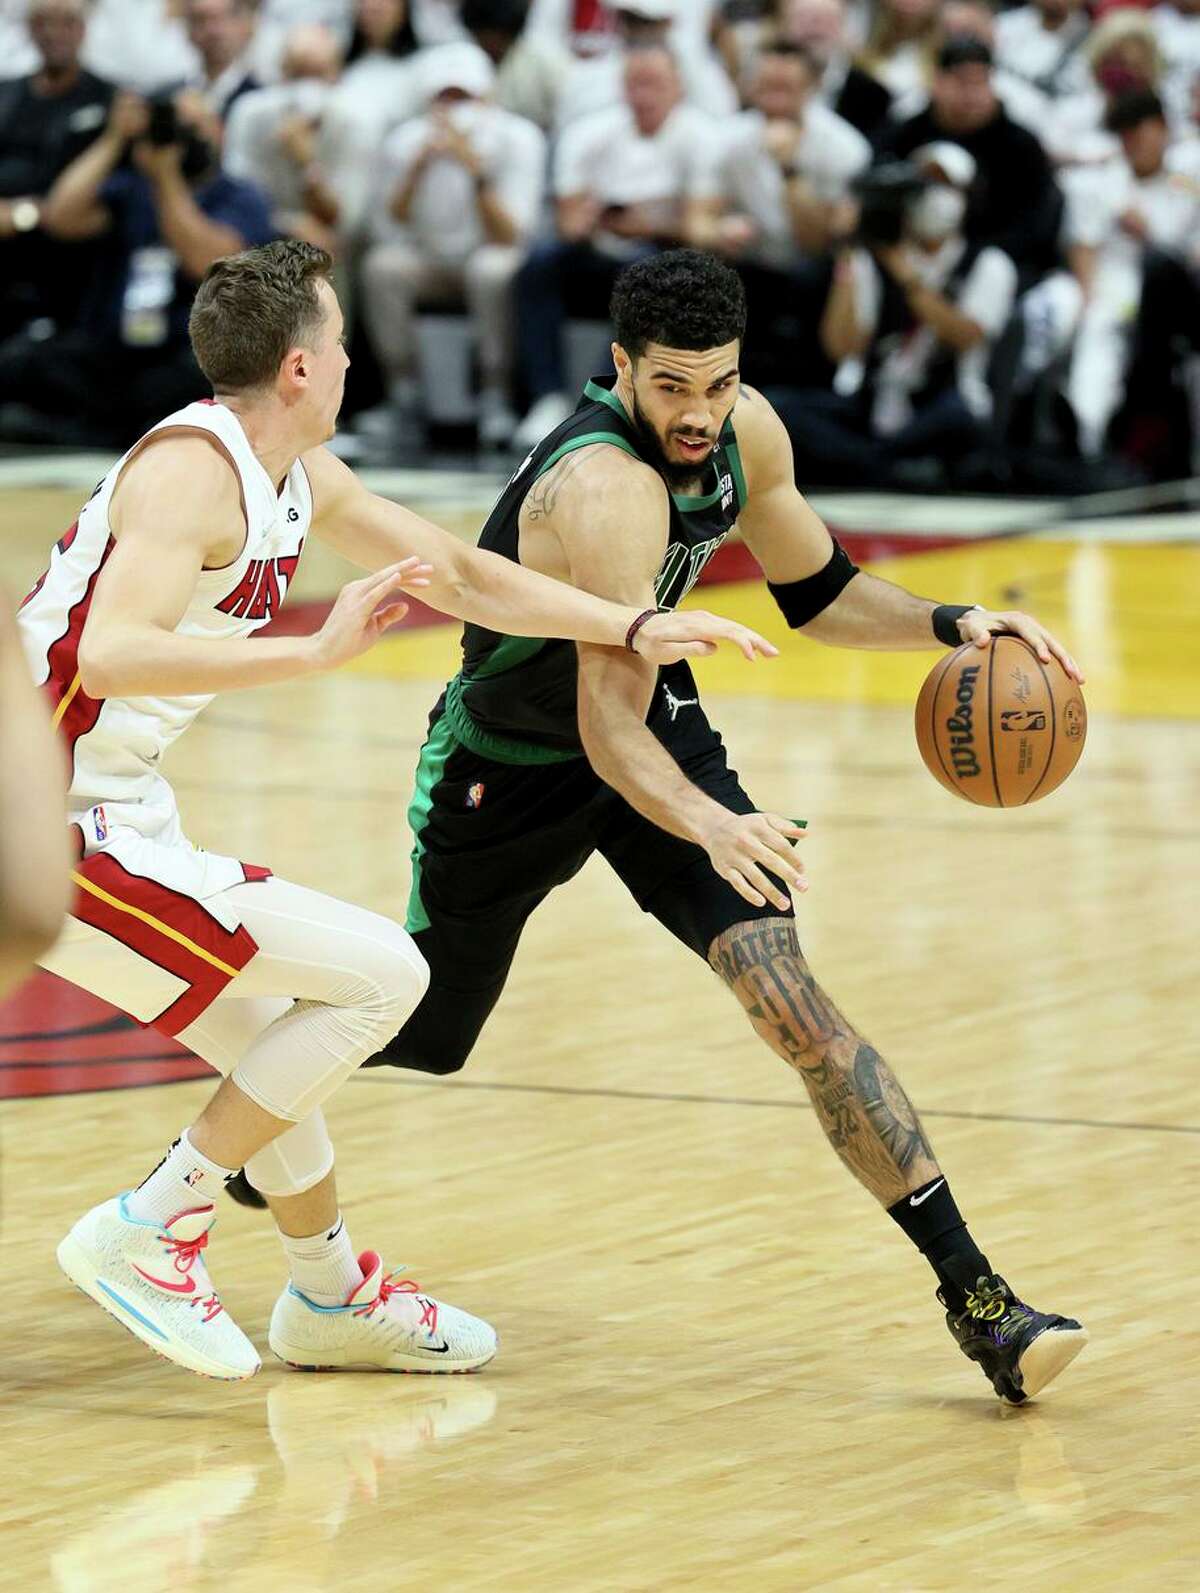 MIAMI, FLORIDA - MAY 25: Jayson Tatum #0 of the Boston Celtics drives the ball against Duncan Robinson #55 of the Miami Heat in Game Five of the 2022 NBA Playoffs Eastern Conference Finals at FTX Arena on May 25, 2022 in Miami, Florida. NOTE TO USER: User expressly acknowledges and agrees that, by downloading and or using this photograph, User is consenting to the terms and conditions of the Getty Images License Agreement. (Photo by Andy Lyons/Getty Images)